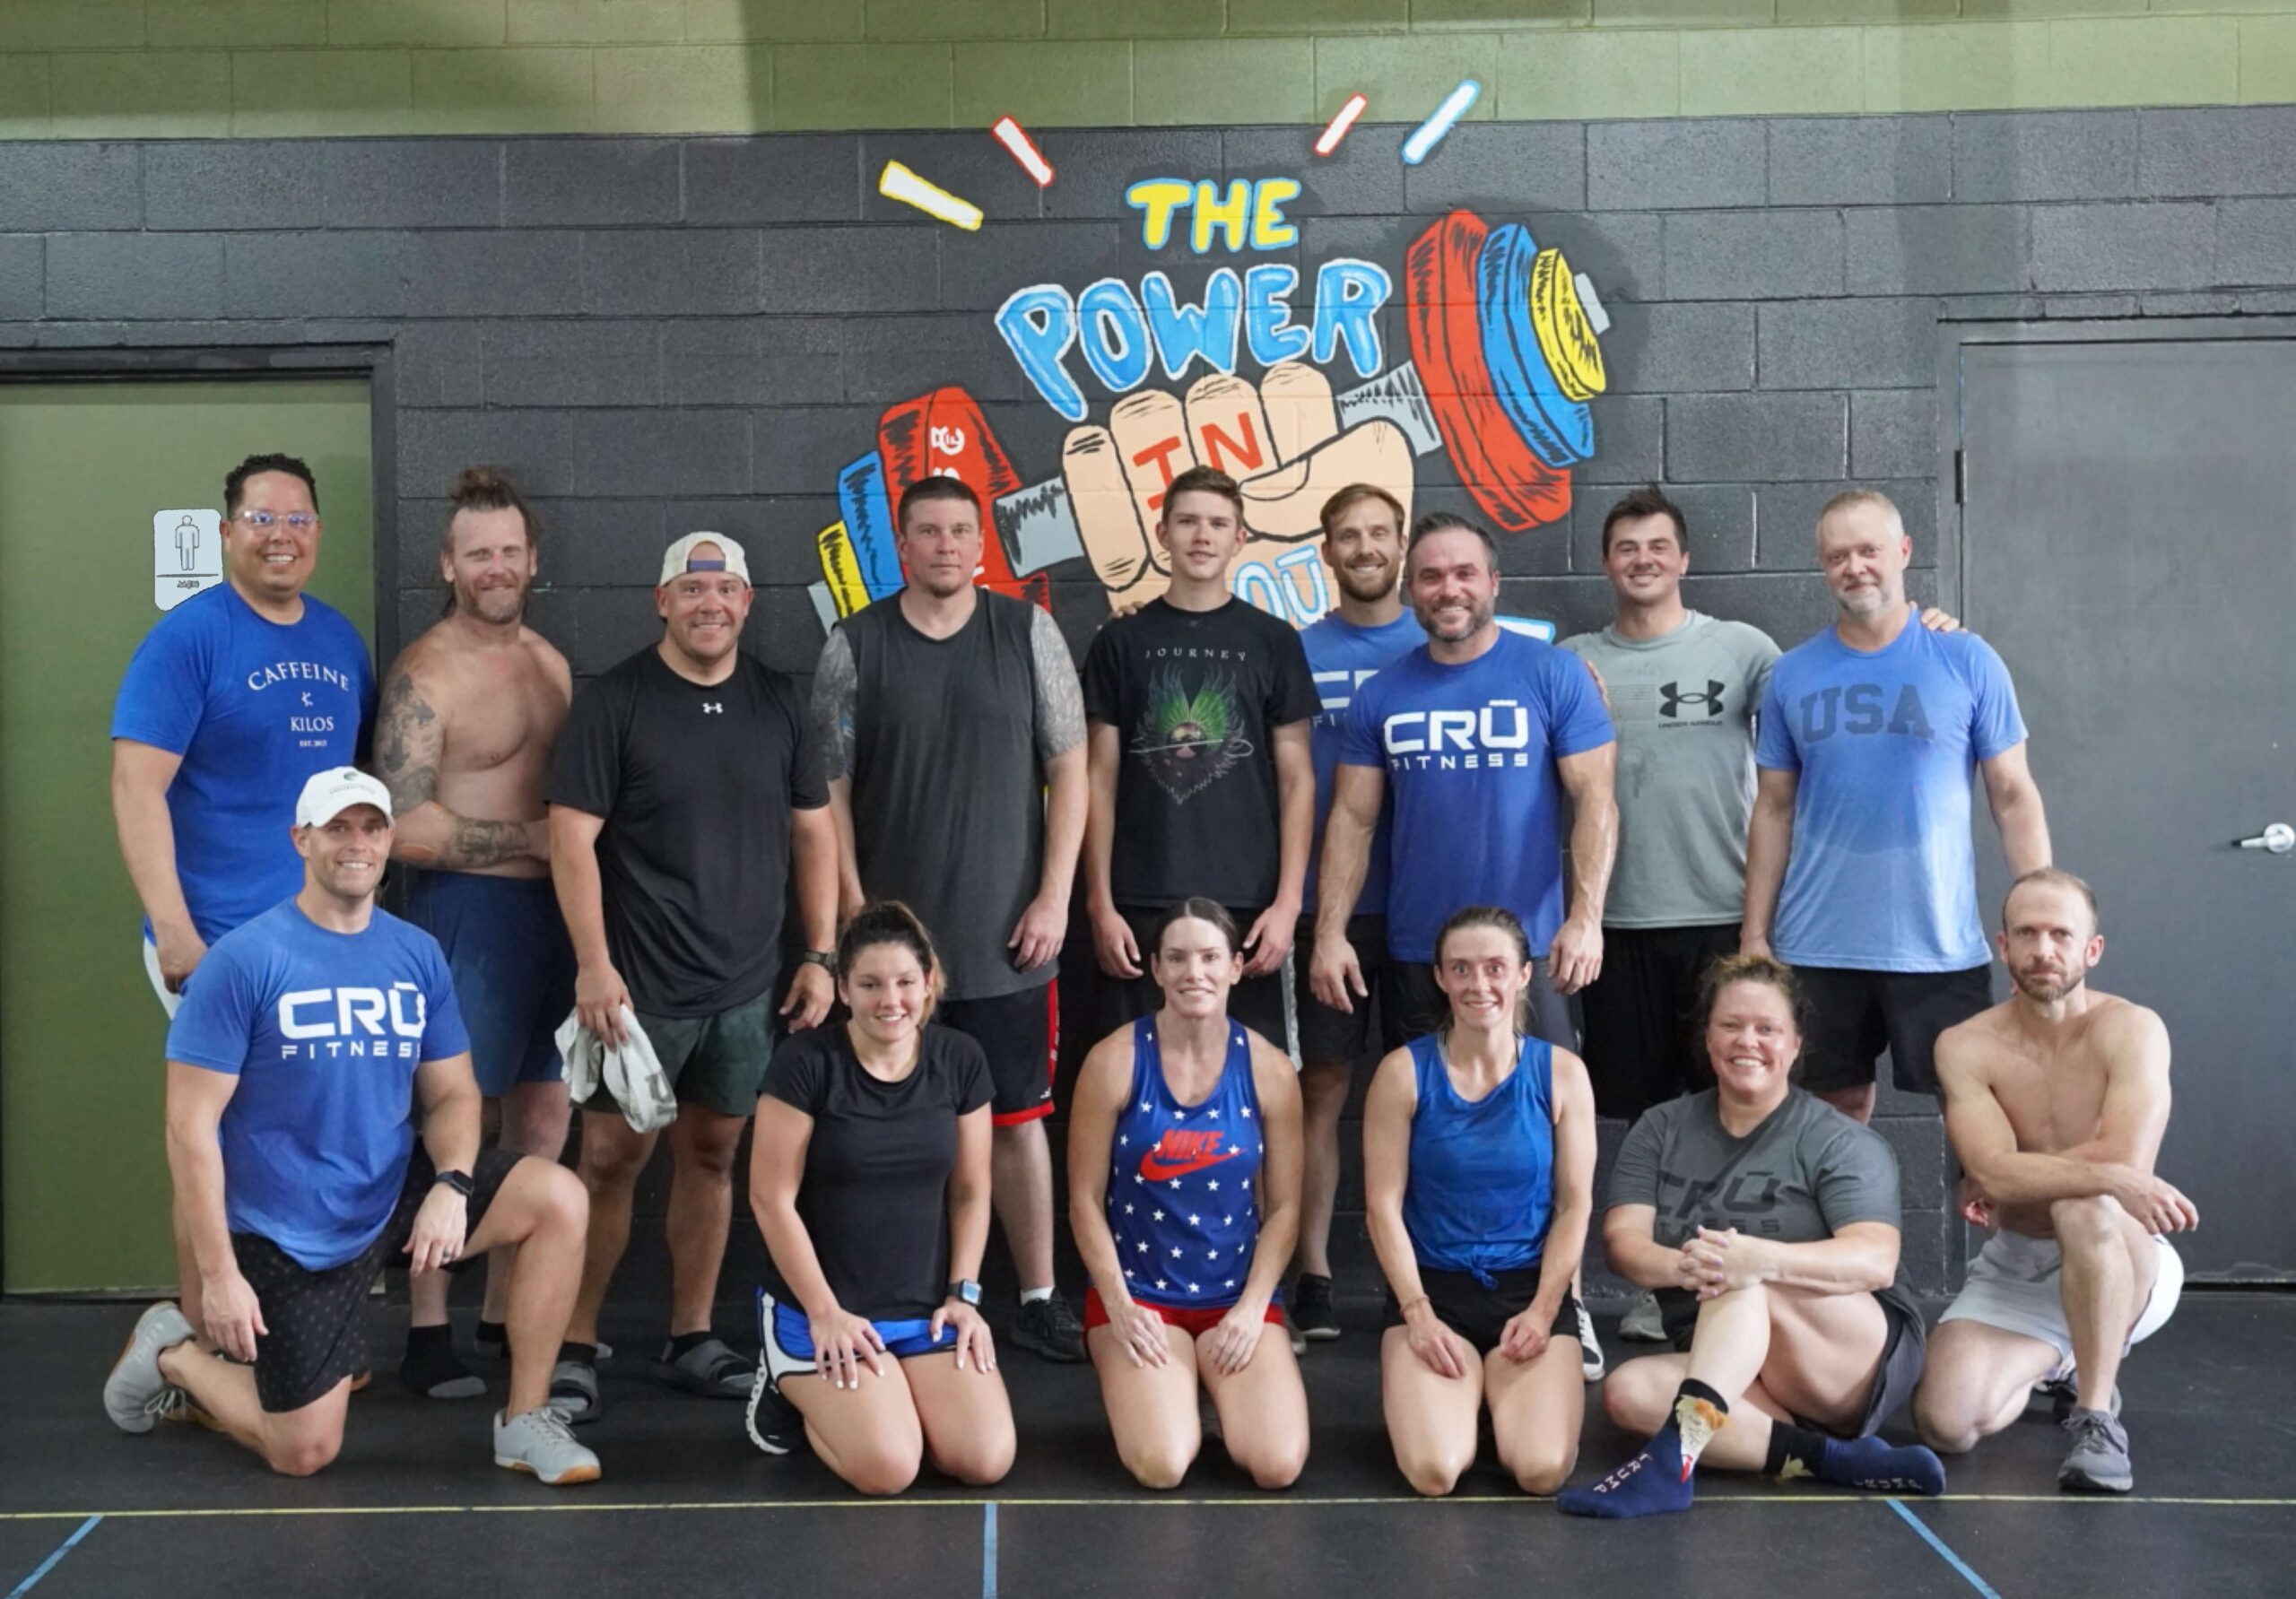 members and trainers of Crū Fitness gym in Ponchatoula, LA posing for a group picture after the July 4th, 2022 workout. They are posed in front of 'The Power In You' multi colored mural on gym wall.